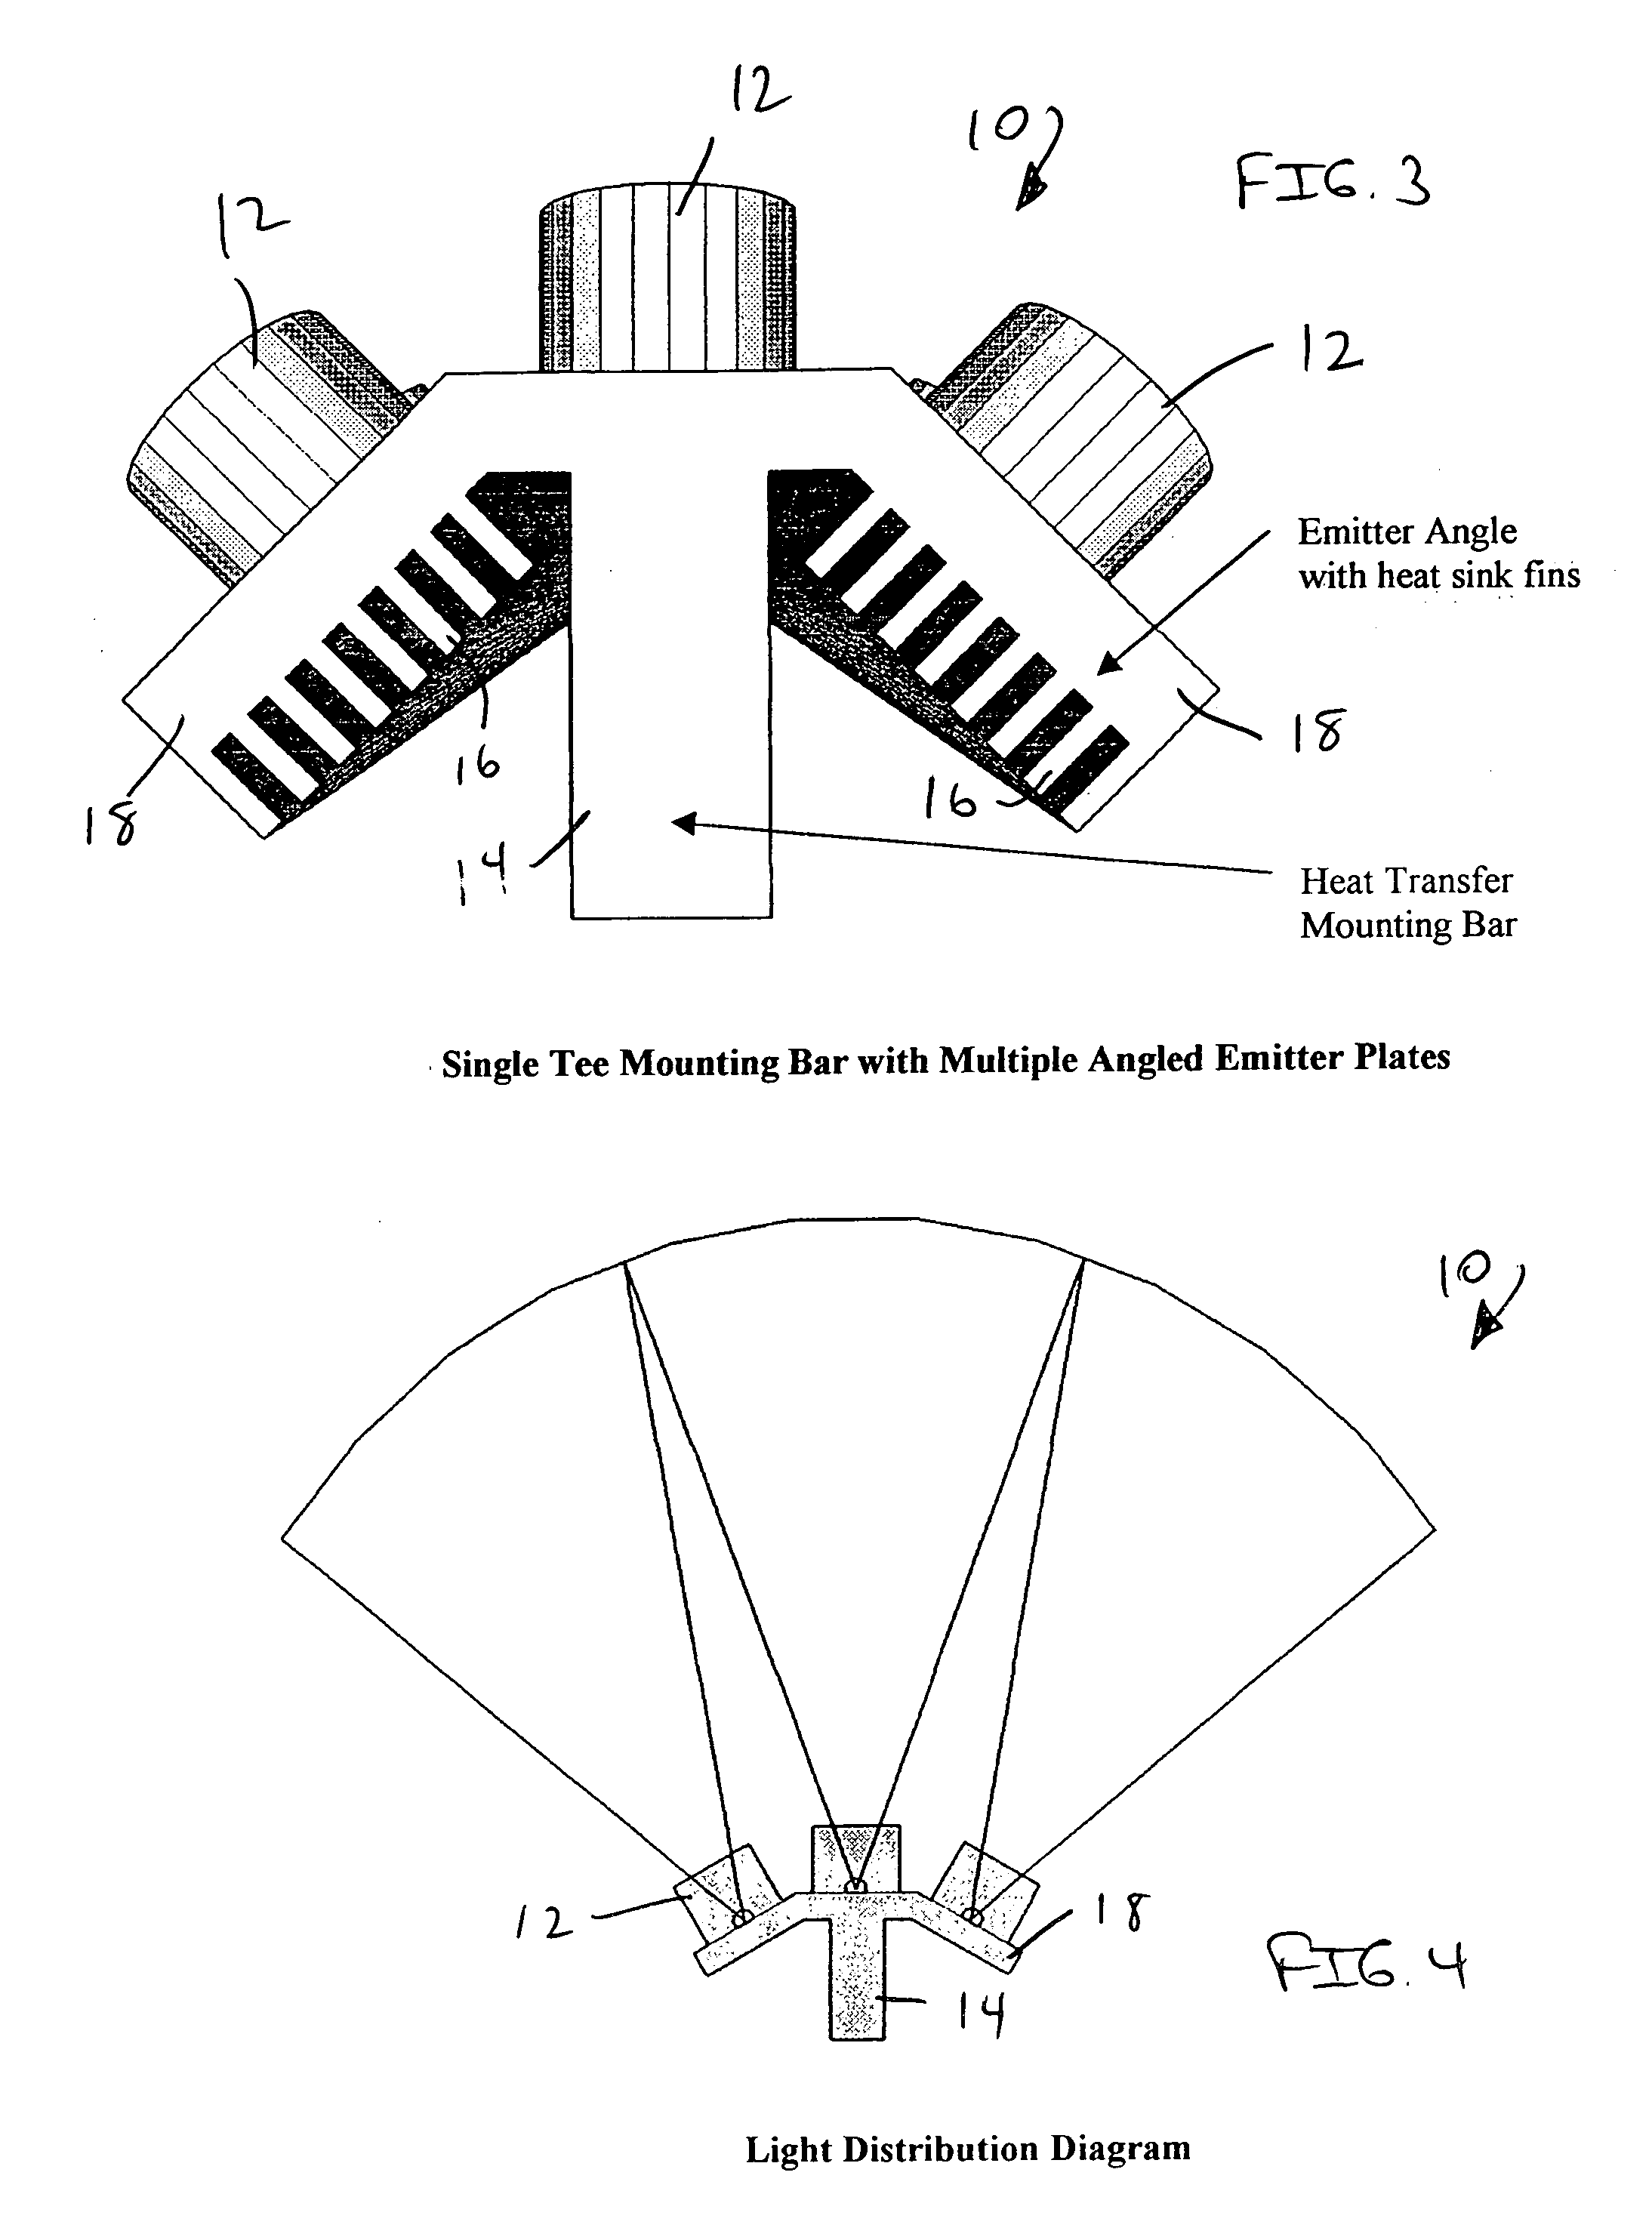 Light emitting diode (L.E.D.) lighting fixtures with emergency back-up and scotopic enhancement